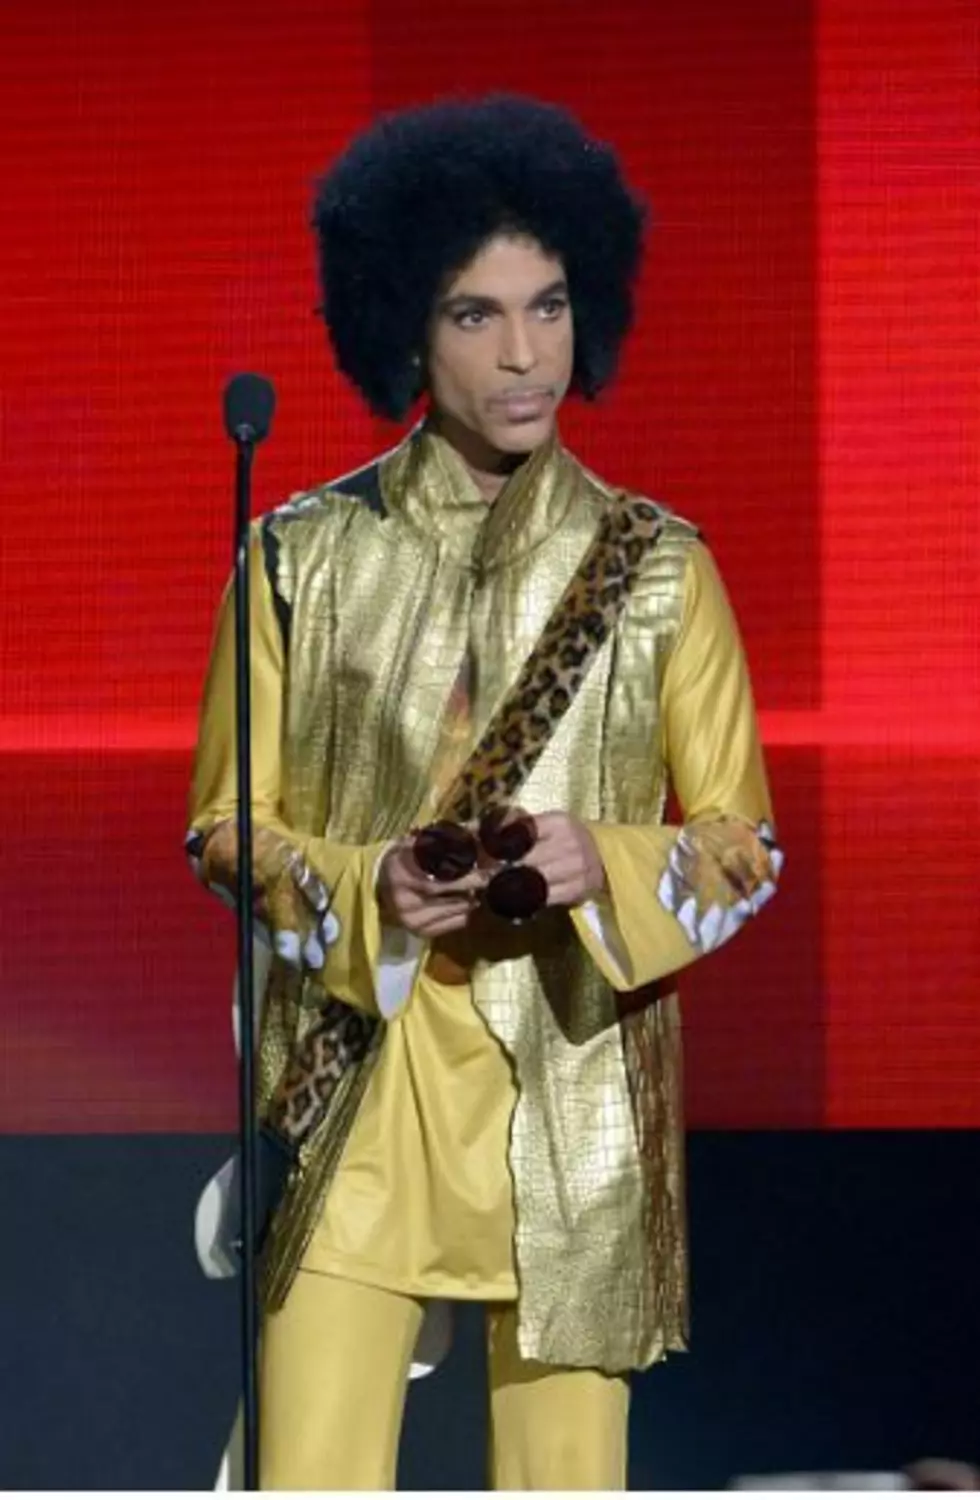 Missouri Man Claims To Be Prince&#8217;s Son And Requests DNA Test &#8211; Tha Wire [VIDEO]